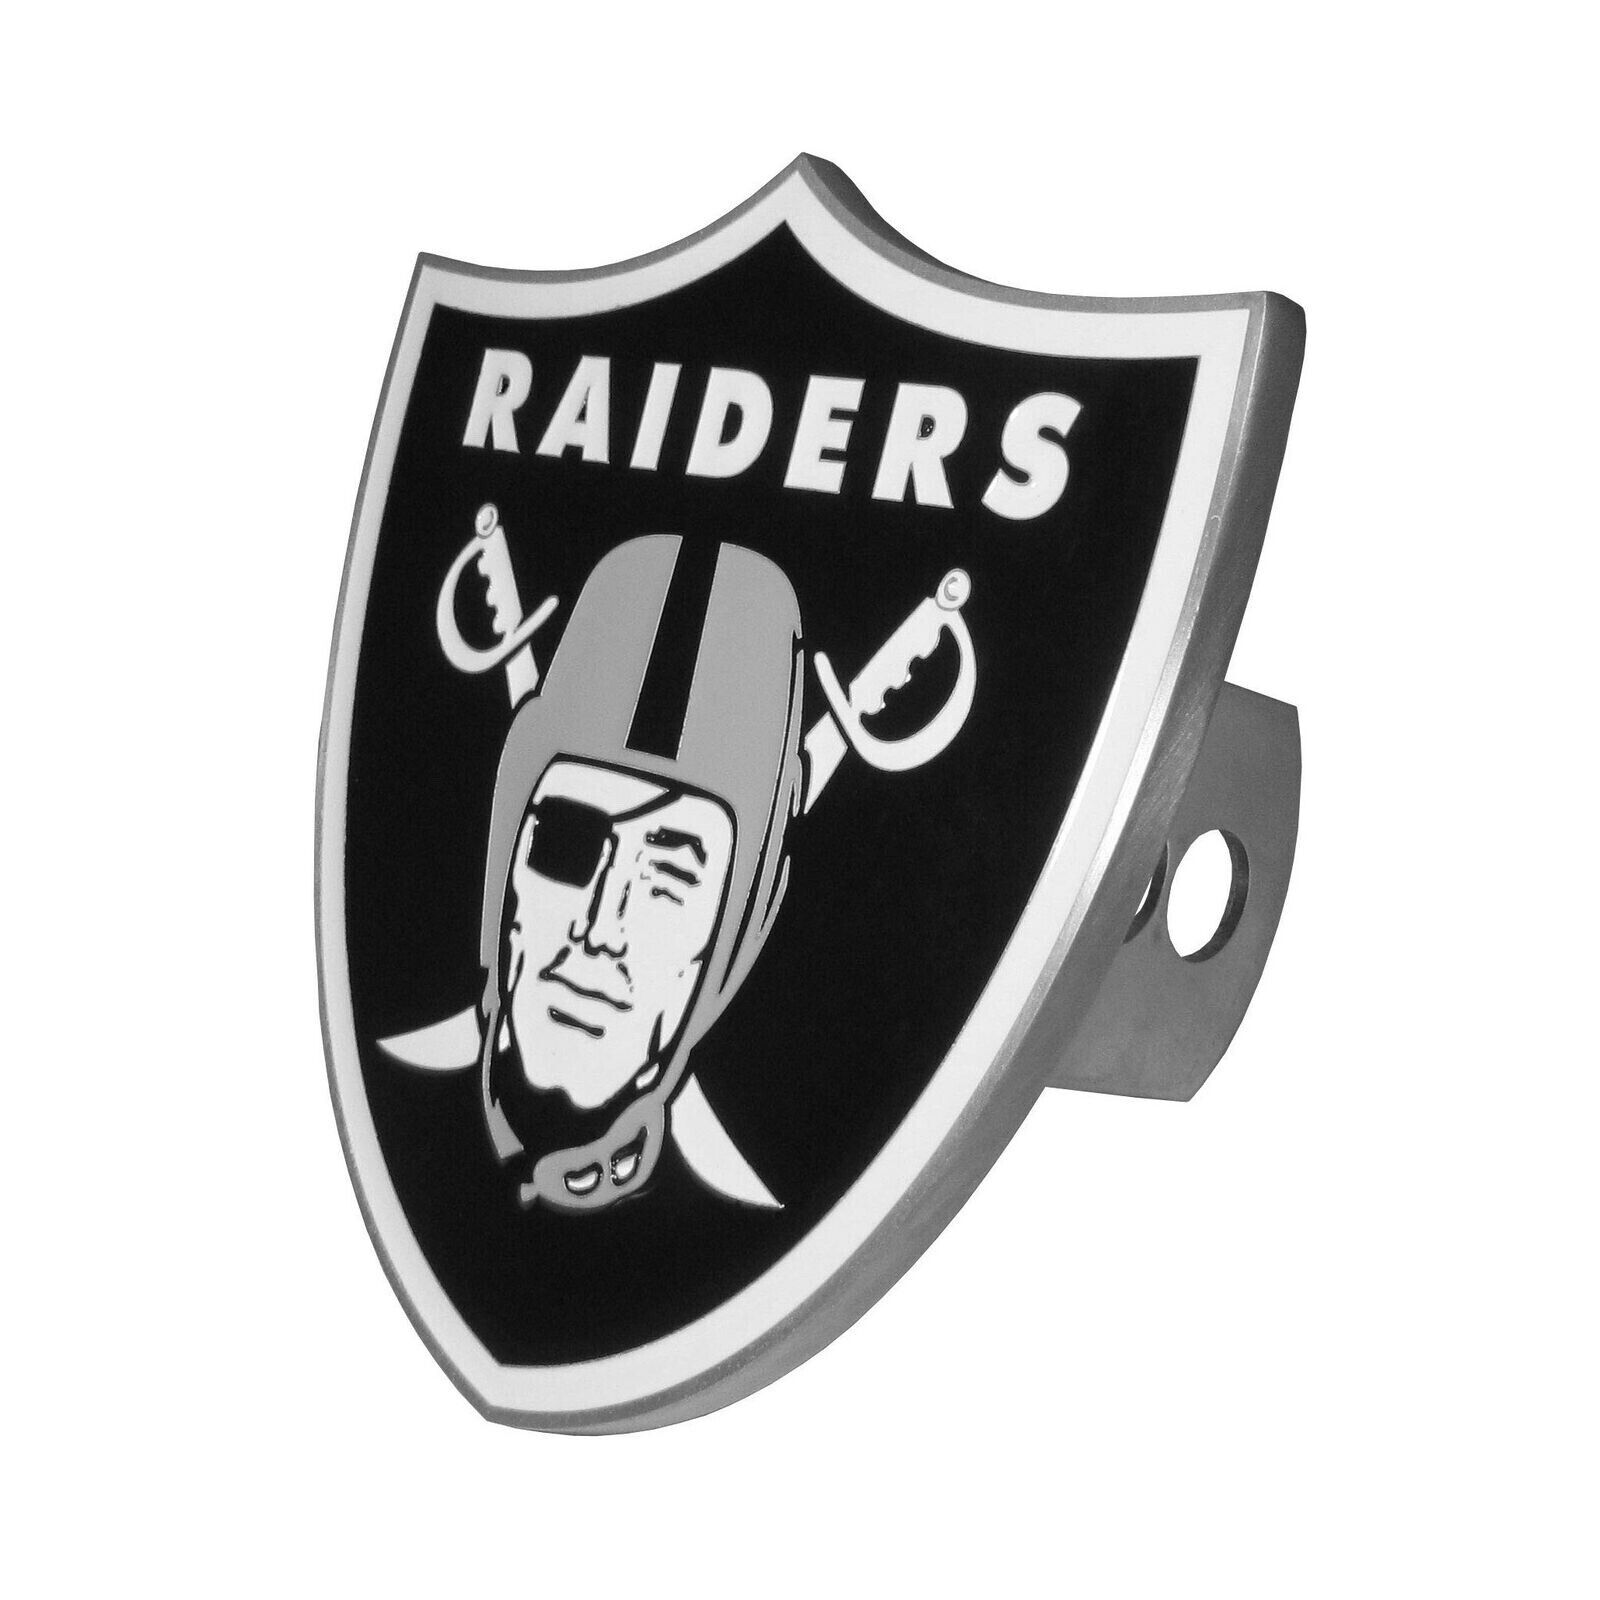 ⭐️⭐️⭐️⭐️⭐️ Oakland Raiders Large Official NFL Hitch Cover Universal Truck SUV